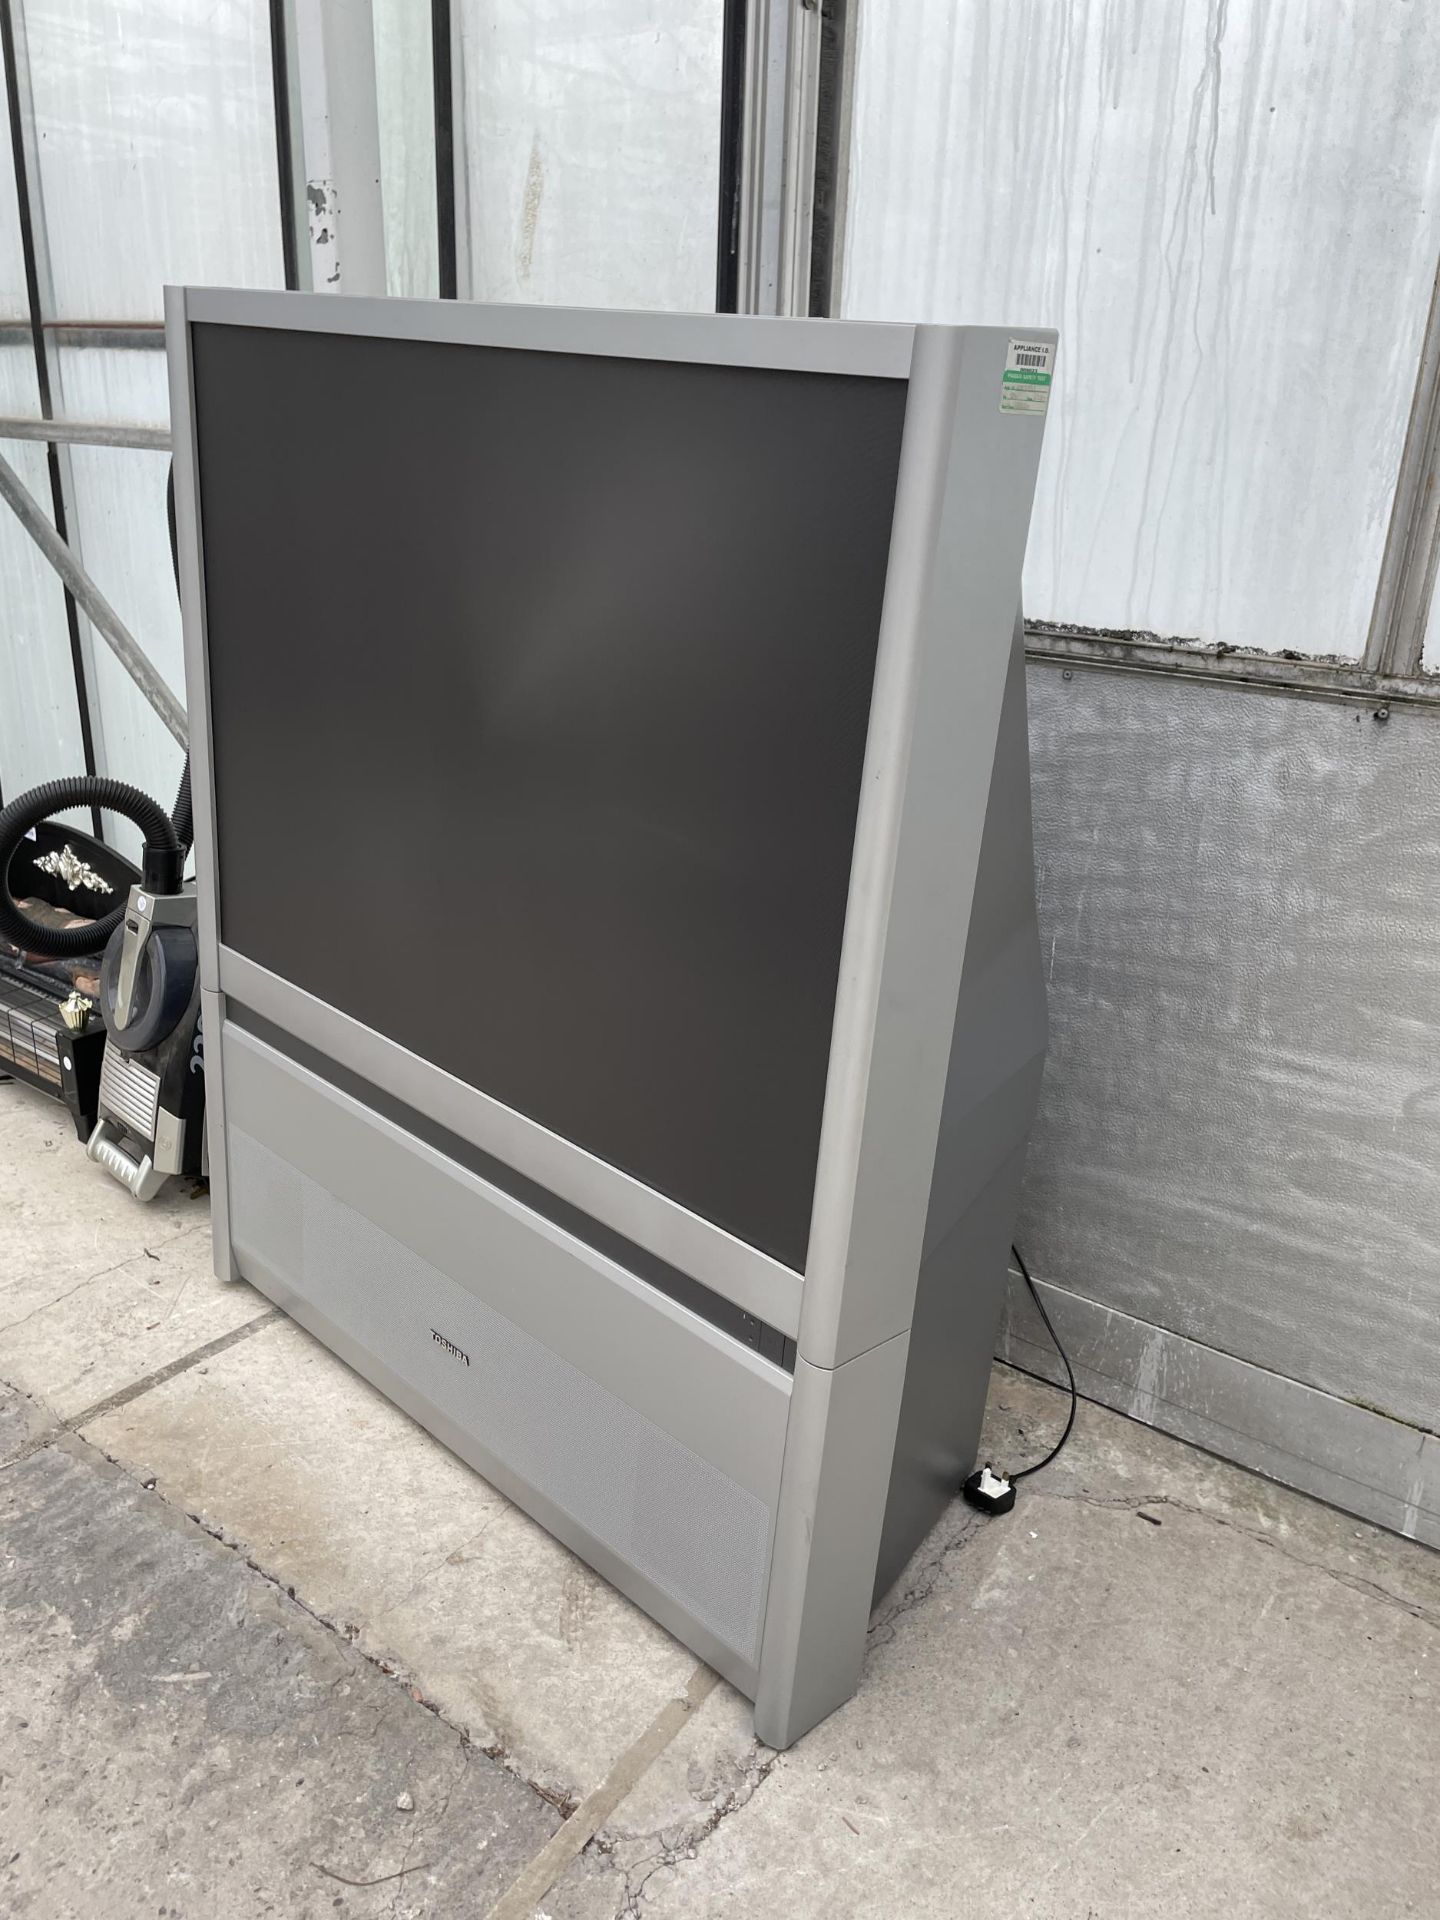 A TOSHIBA 43" TELEVISION ON STAND